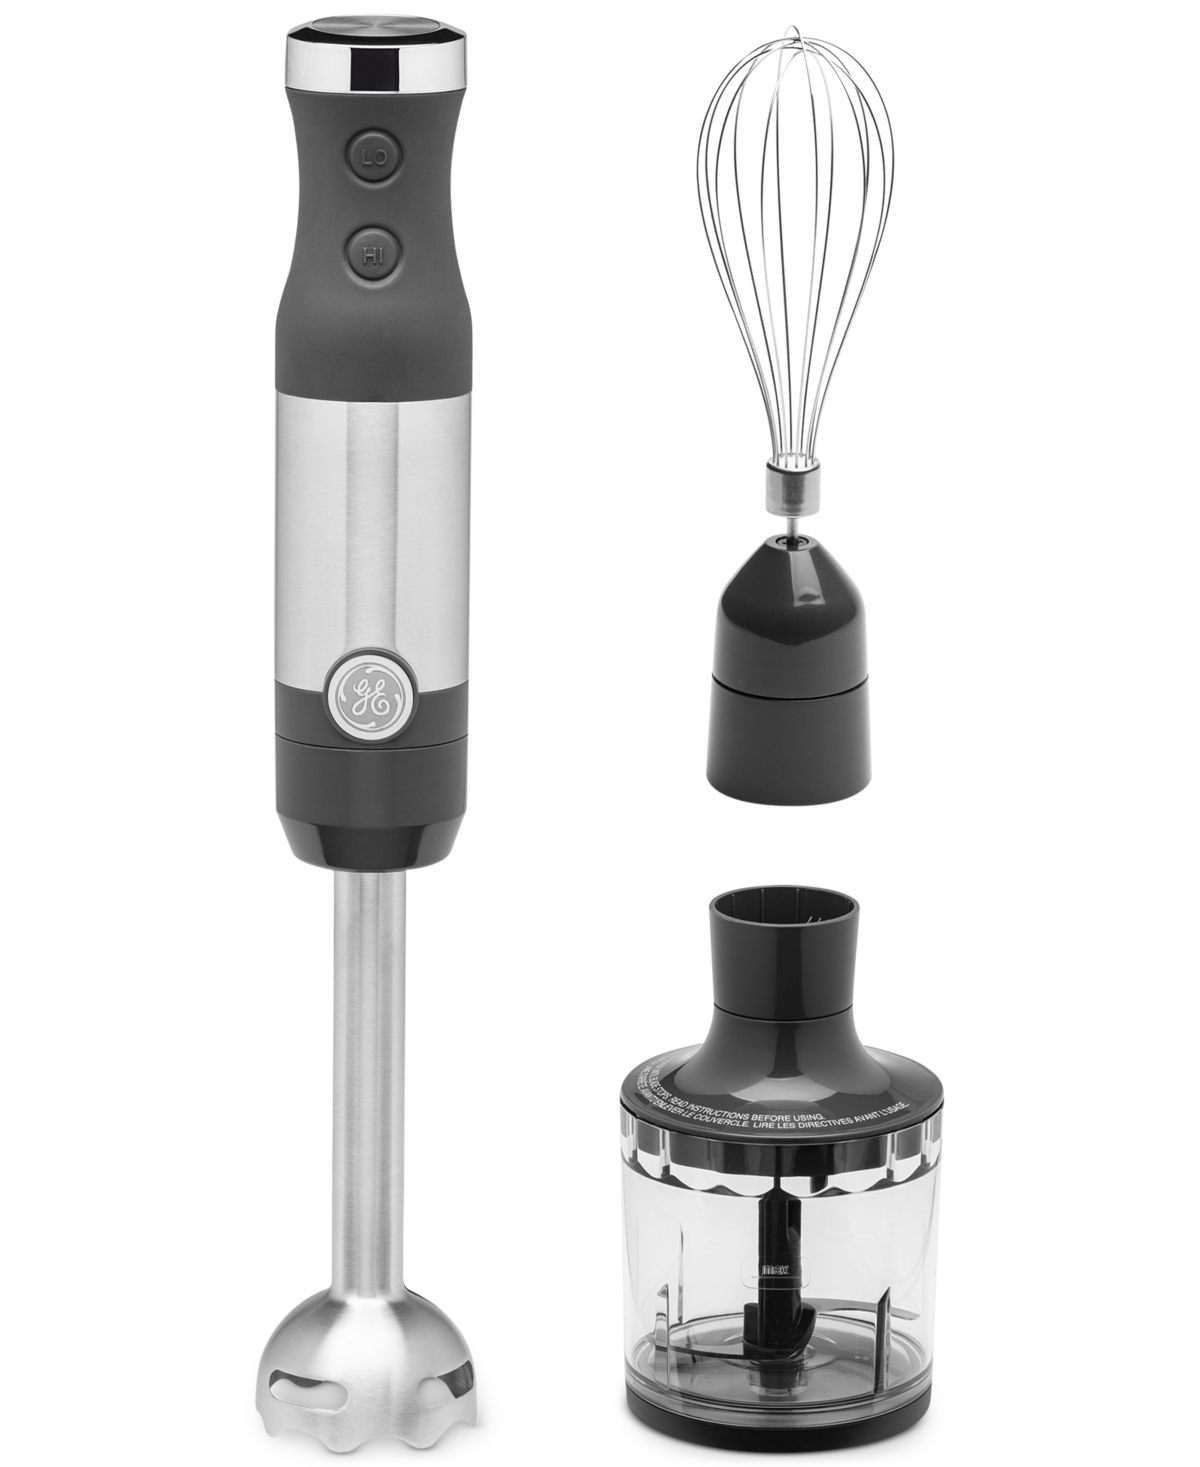 Ge Appliances Ge Immersion Blender & Accessory Kit In Stainless Steel